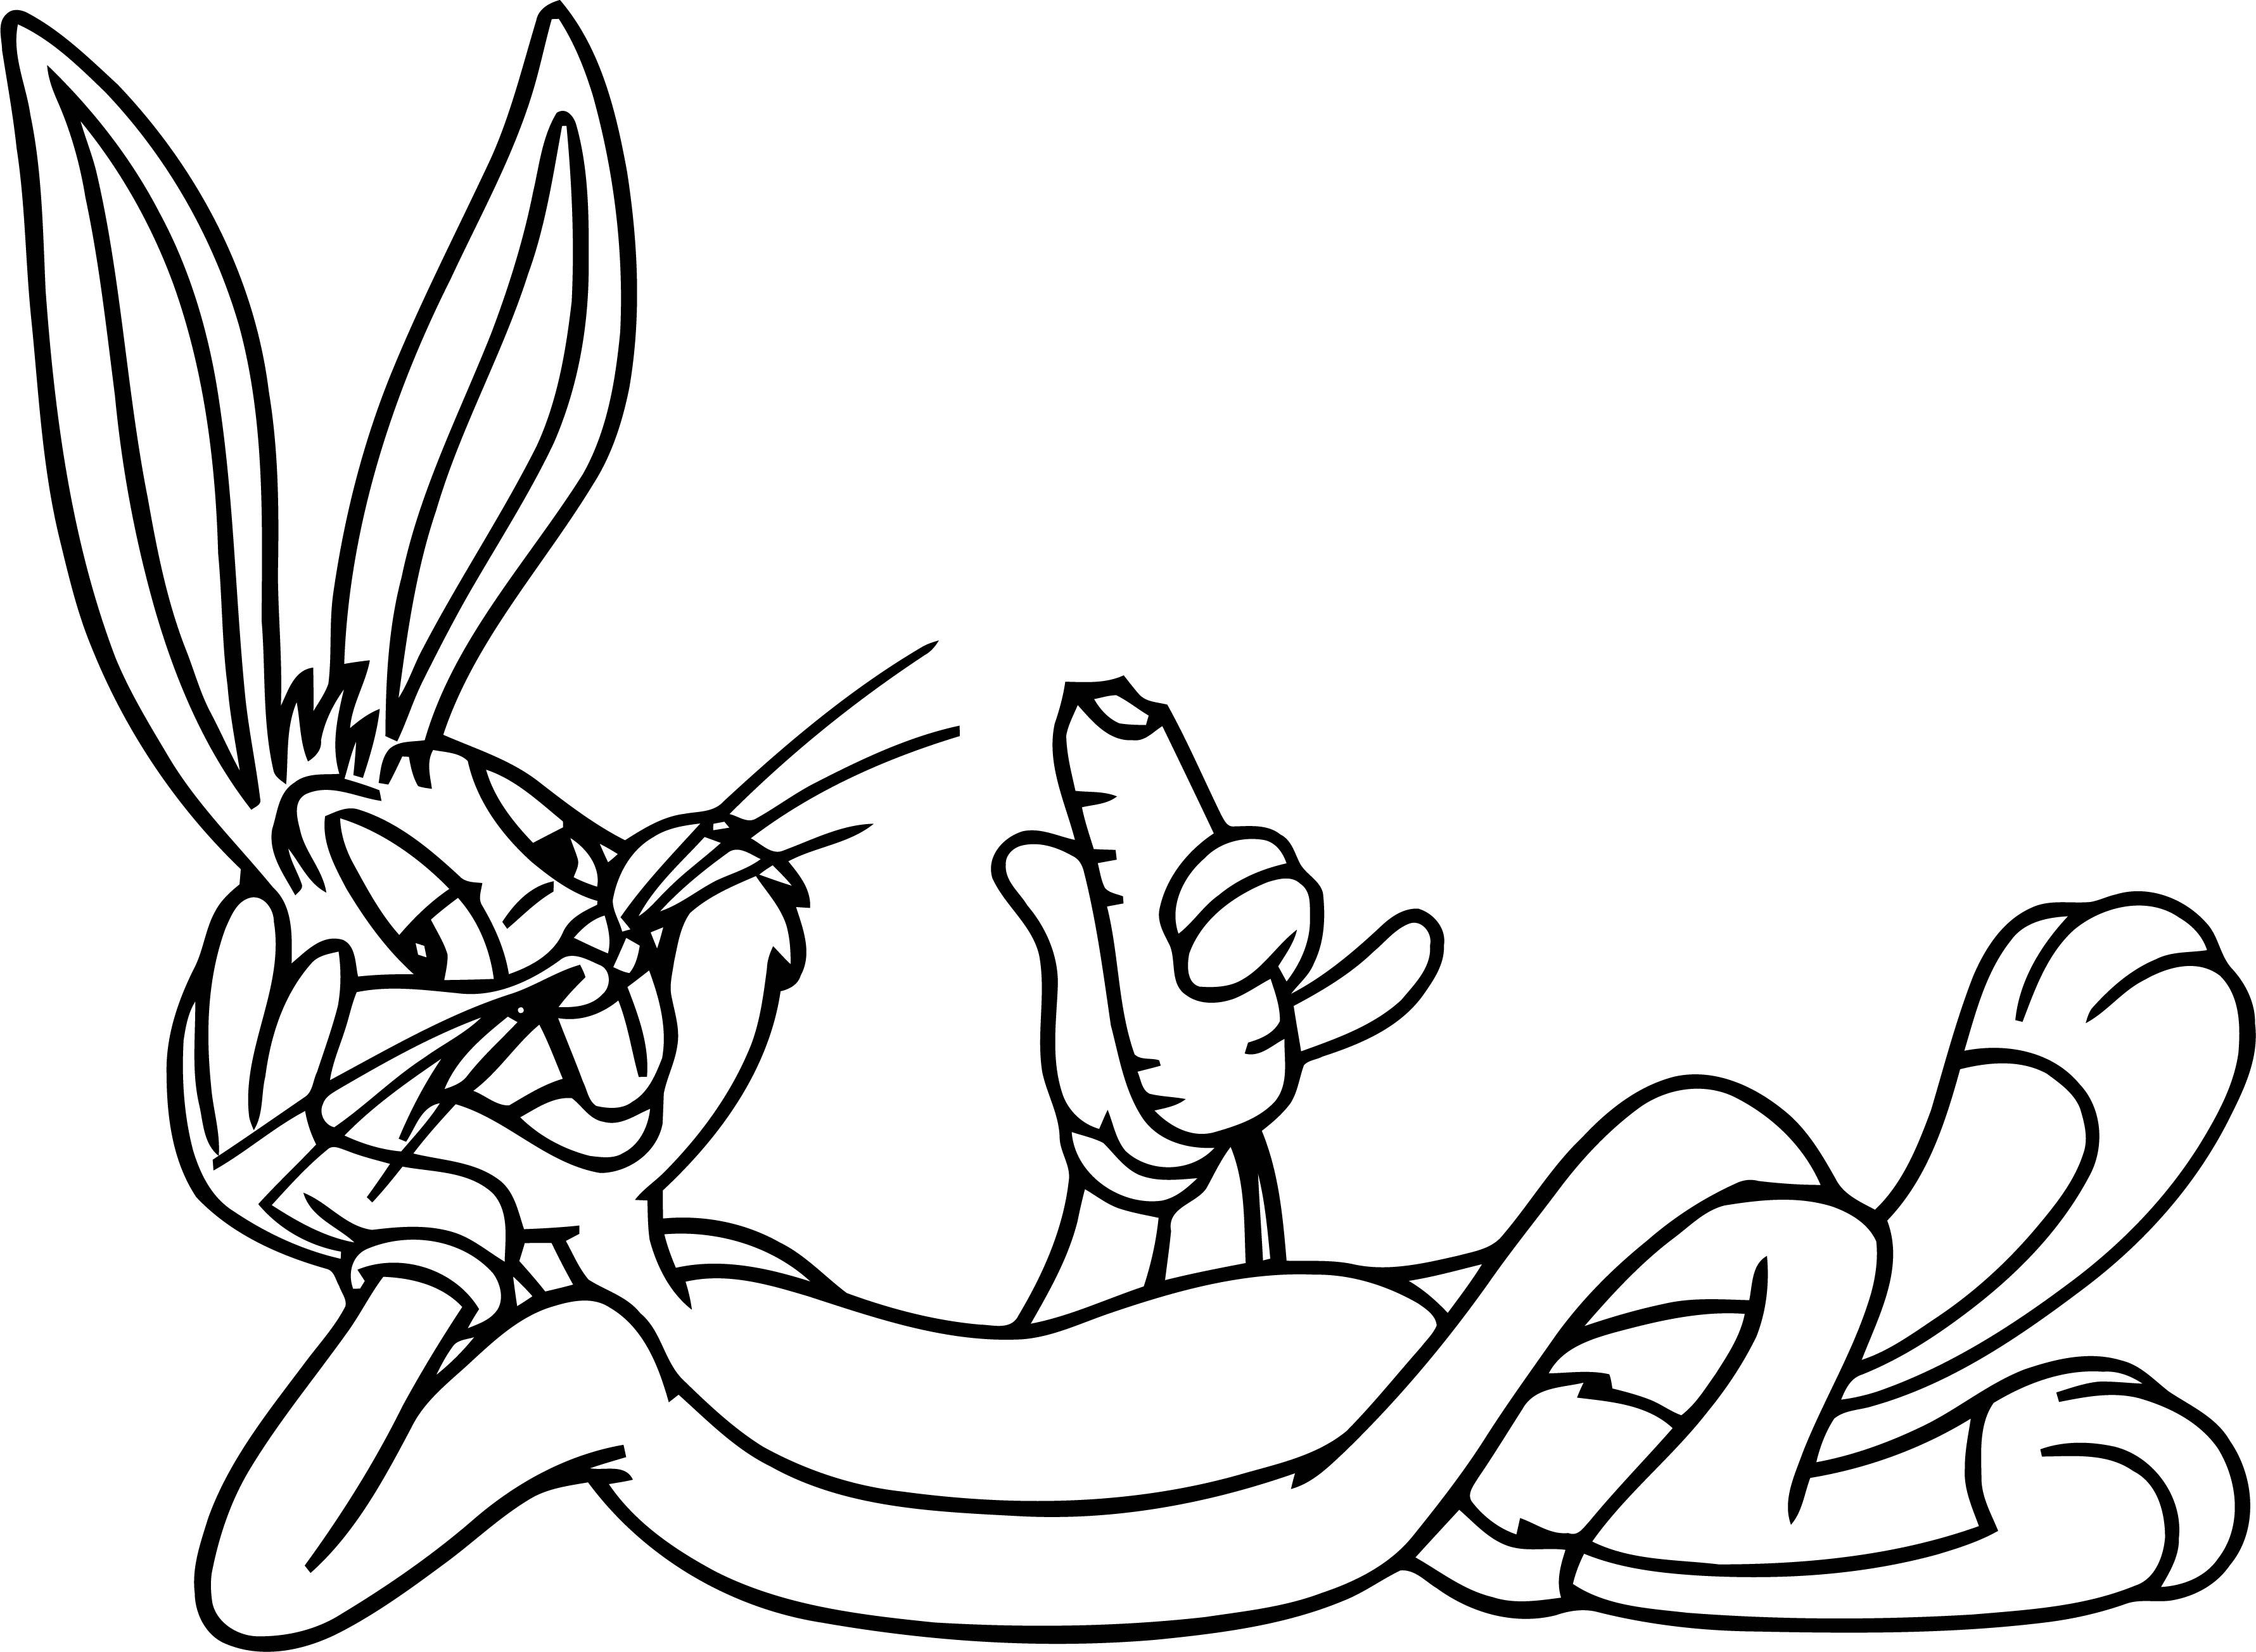 Bugs bunny looney tunes characters the looney tunes show coloring page bugs bunny drawing bunny coloring pages bug coloring pages